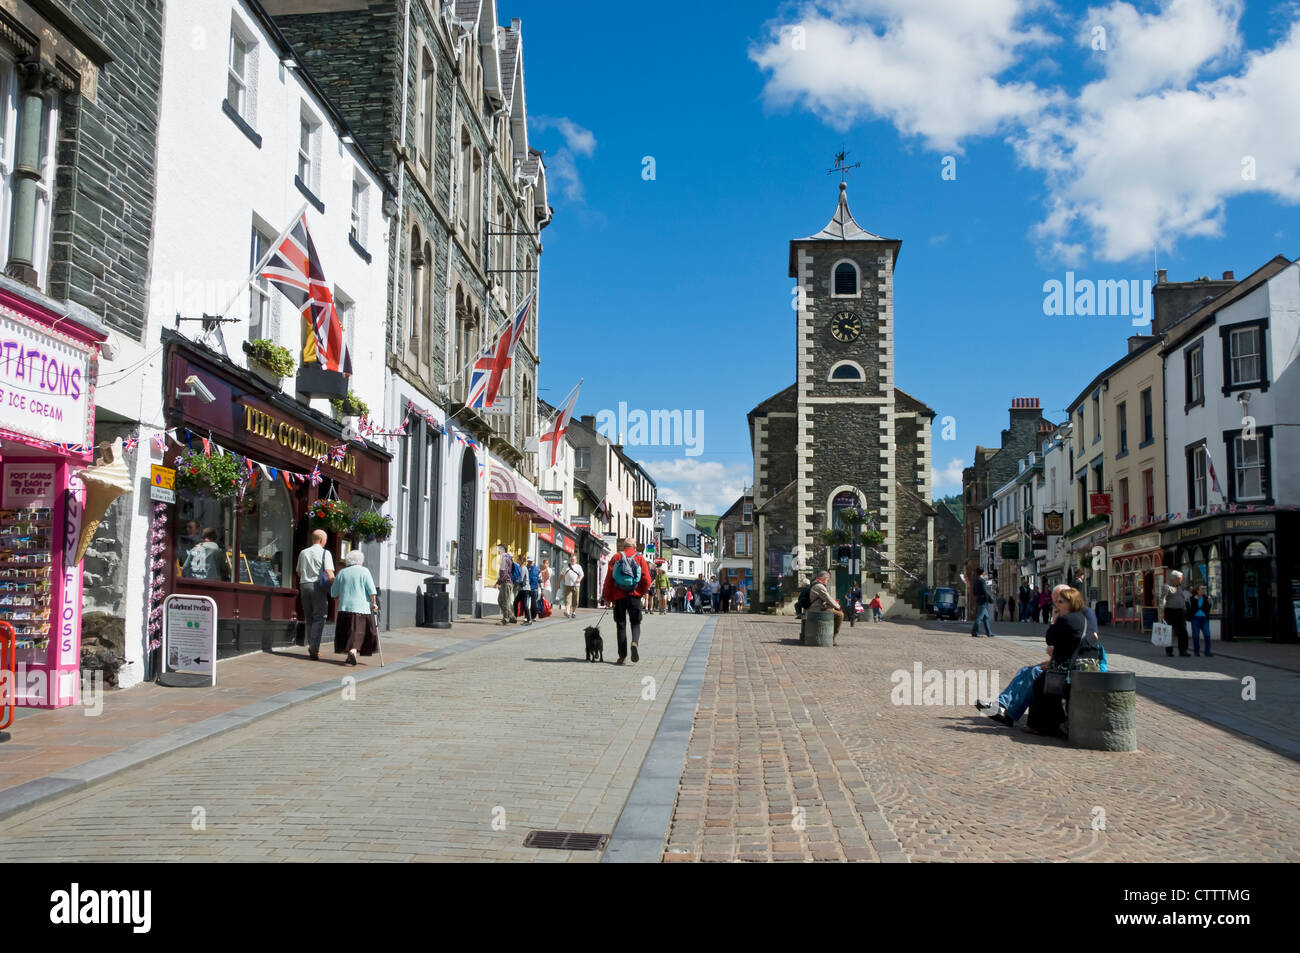 Shops stores and Moot Hall in summer Market Square Keswick town centre Cumbria England UK United Kingdom GB Great Britain Stock Photo